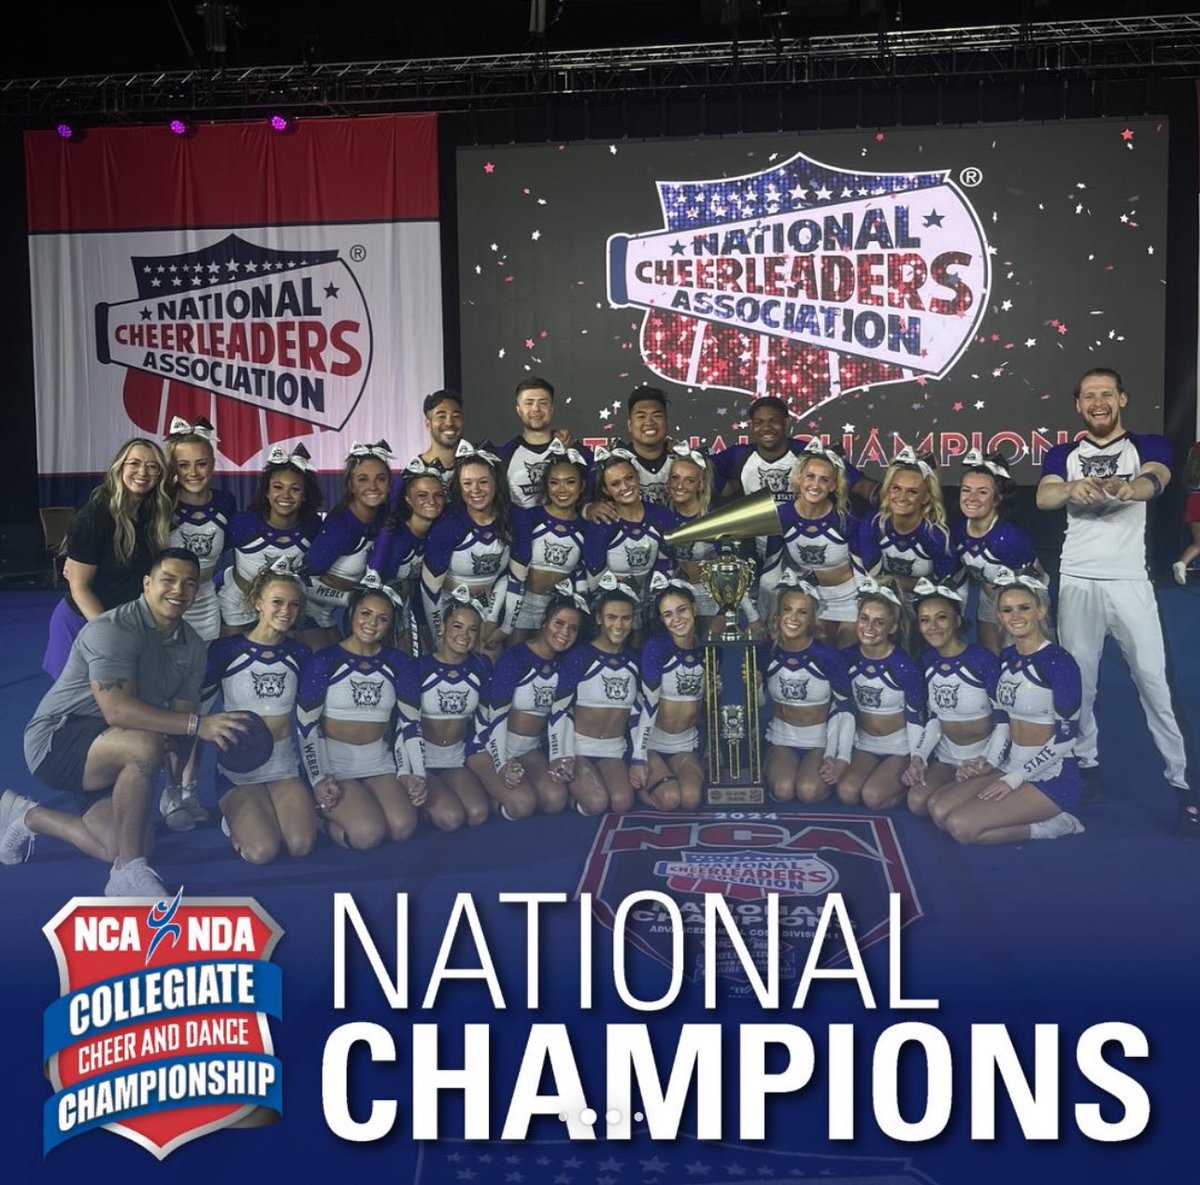 What a day for Weber State Cheer! TWO GRAND NATIONAL CHAMPIONSHIPS! 🏆🏆 Won the National title in the Large and Small Coed Divisions! And had the highest score of any school in any division in both competitions to win the Grand National title! Great, Great, Great! 👏👏